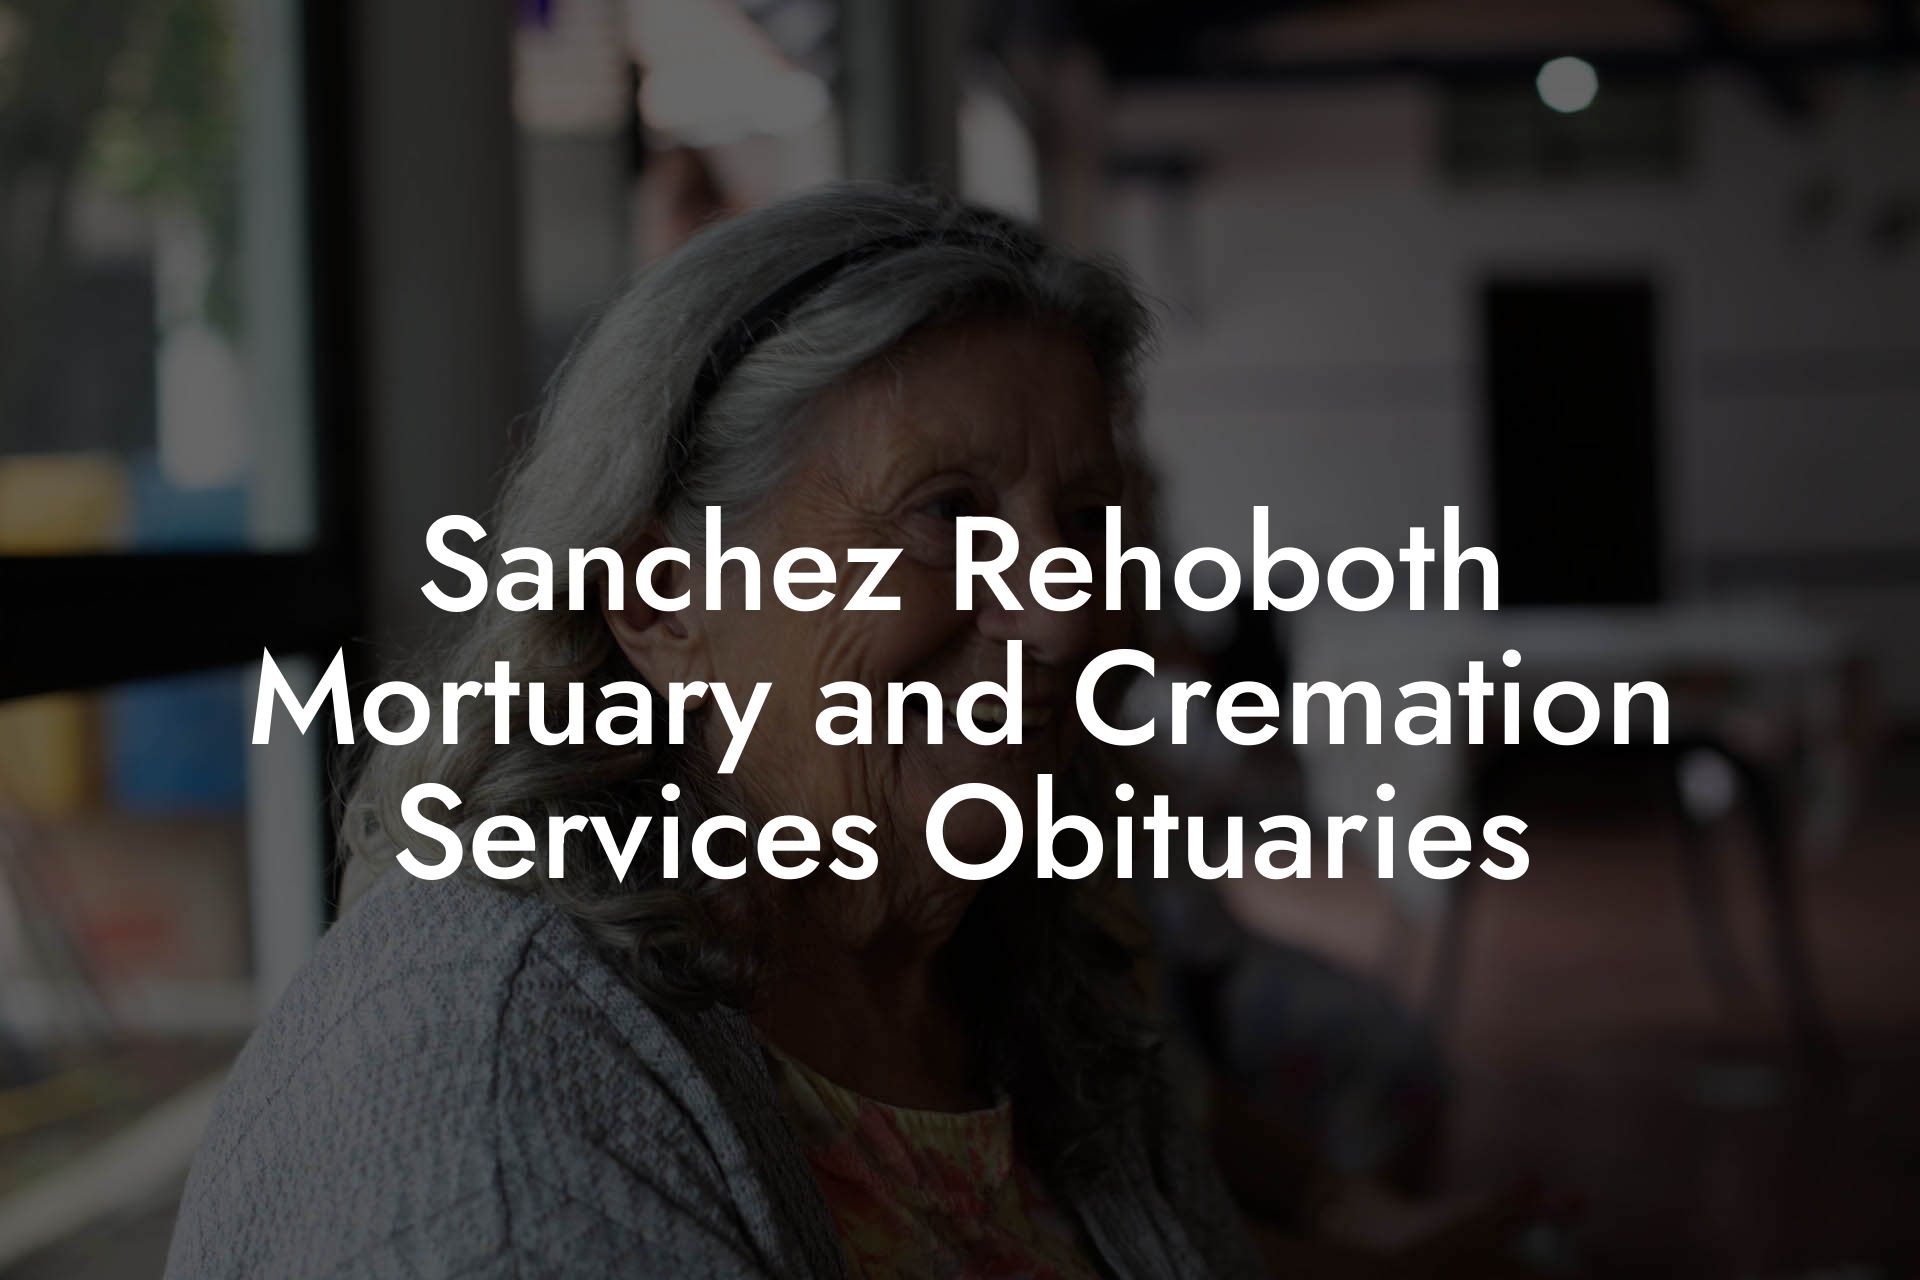 Sanchez Rehoboth Mortuary and Cremation Services Obituaries